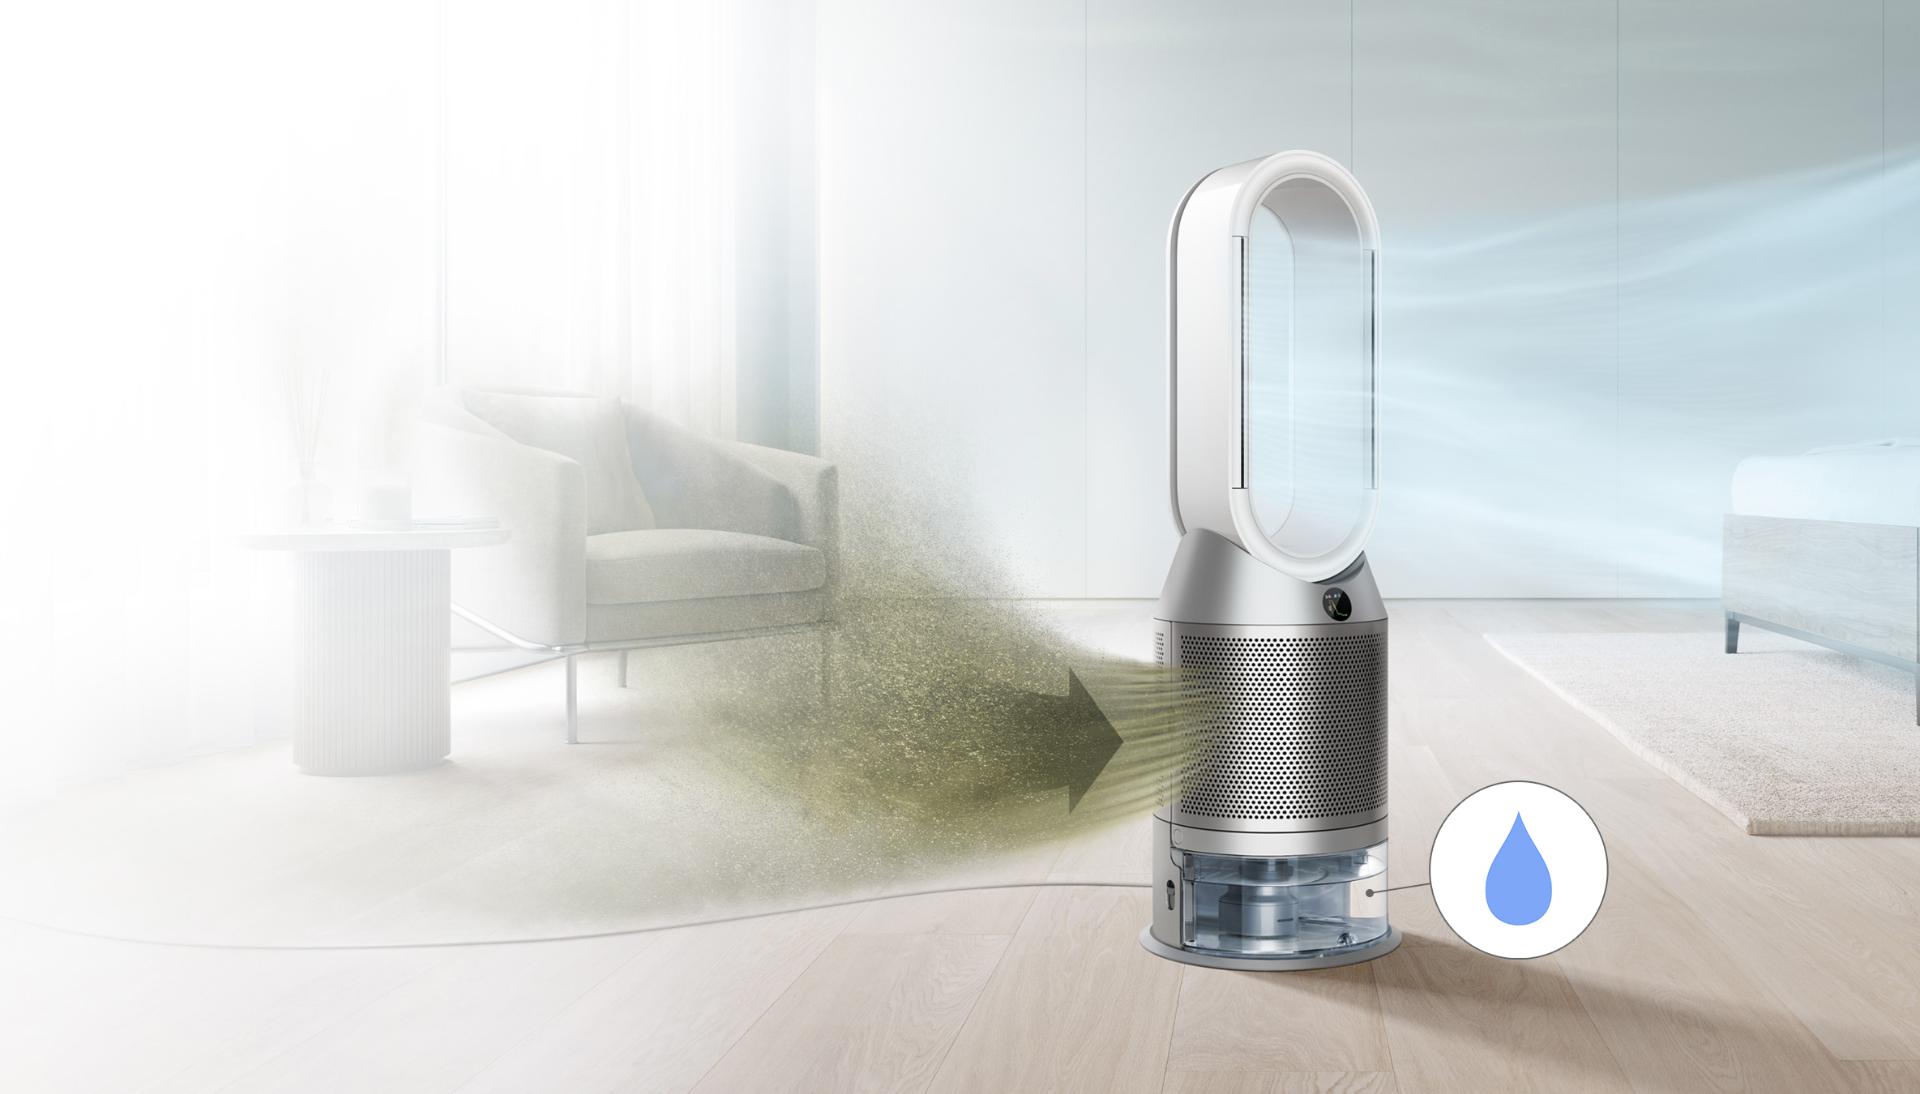 Pollutants captured by the Dyson purifier humidifier fan and purified air expelled